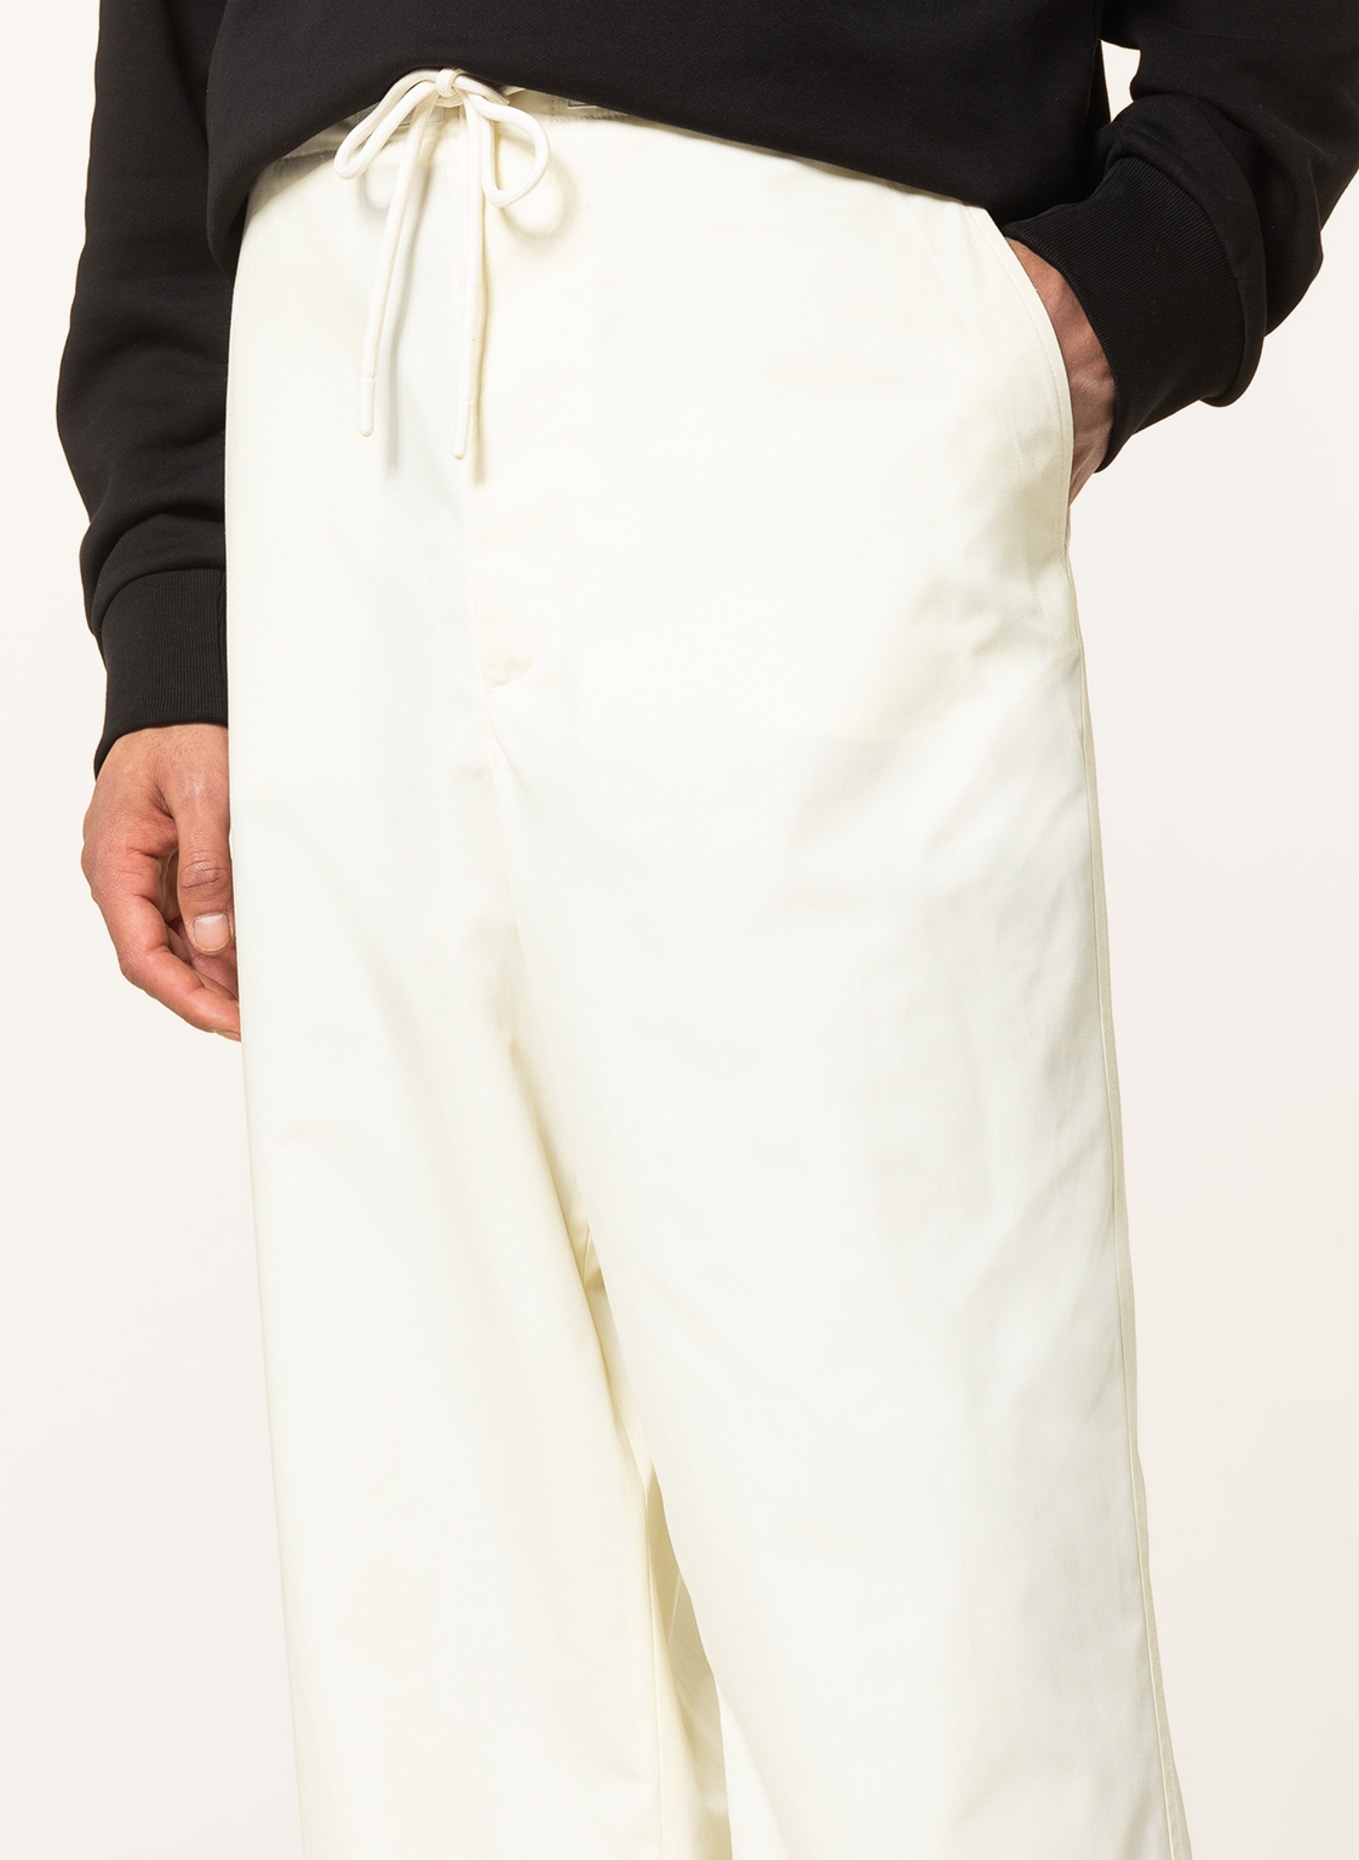 MONCLER GENIUS Trousers in jogger style, Color: ECRU (Image 5)